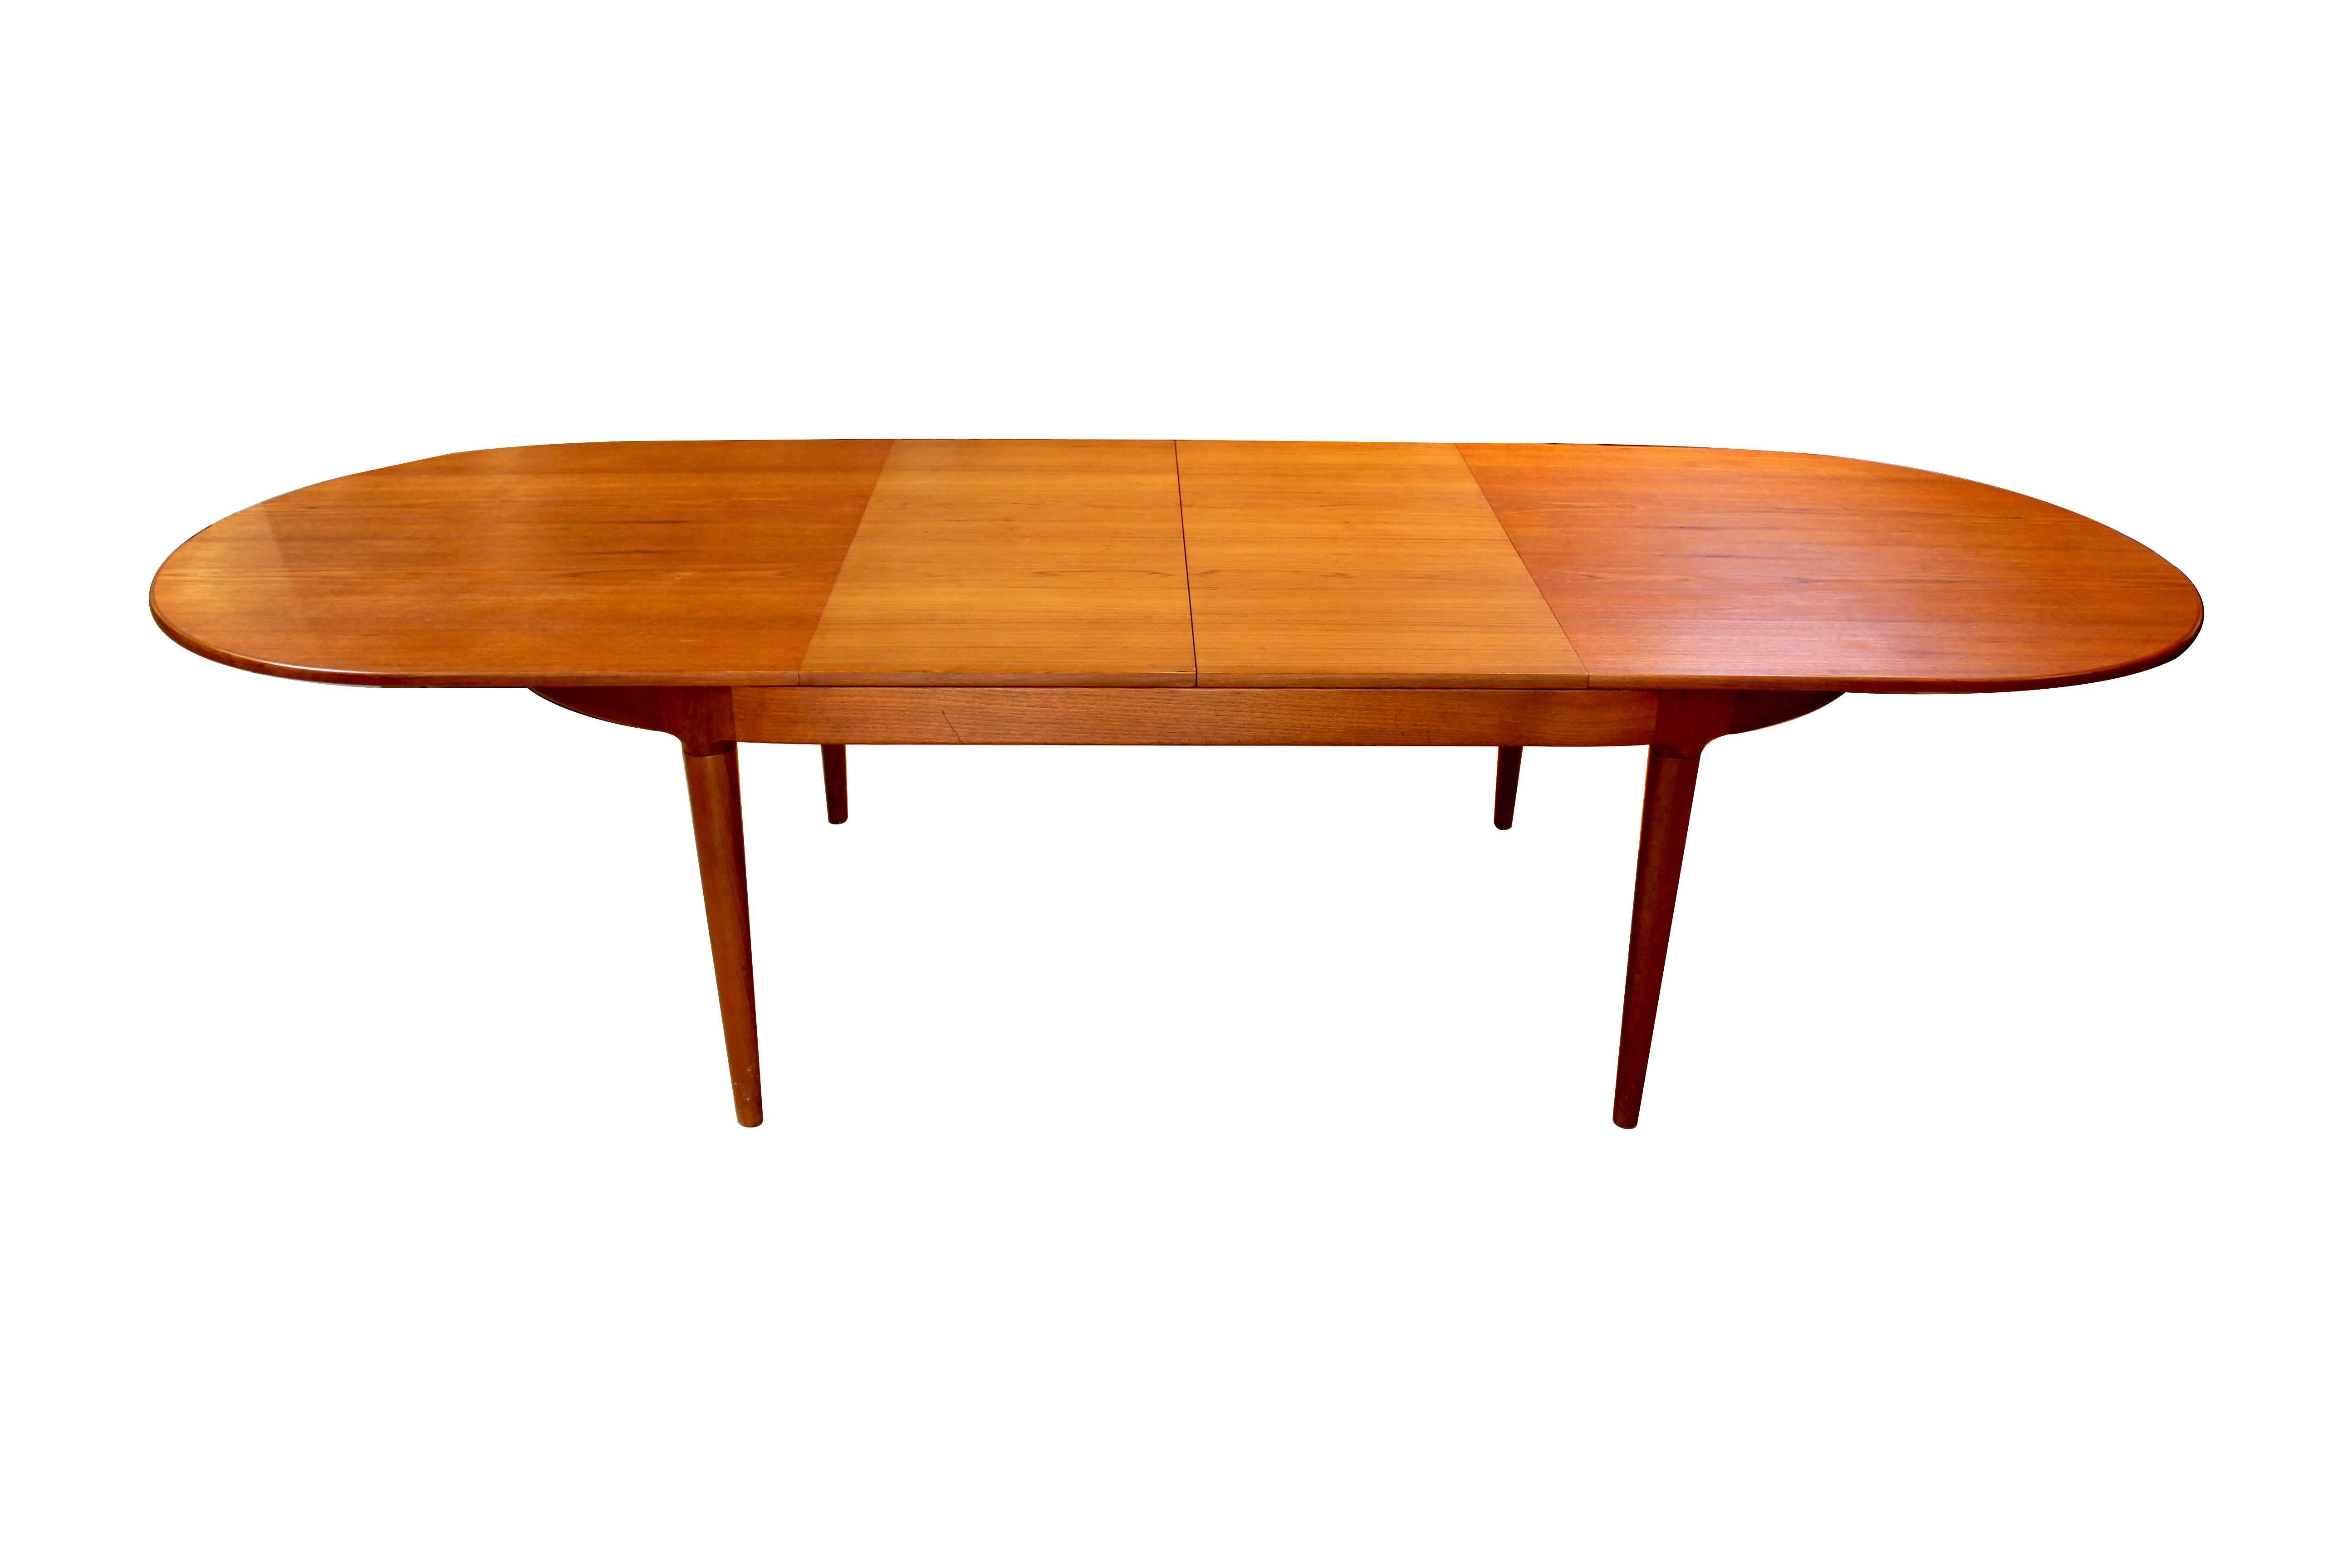 Early 1960s Danish Modern teak dining table with two butterfly leaves, designed by Arne Hovmand-Olsen for Mogens Kold. The leaves store internally; the top slides apart (while the legs stay in place) and the leaves fold out. Without the leaves, the